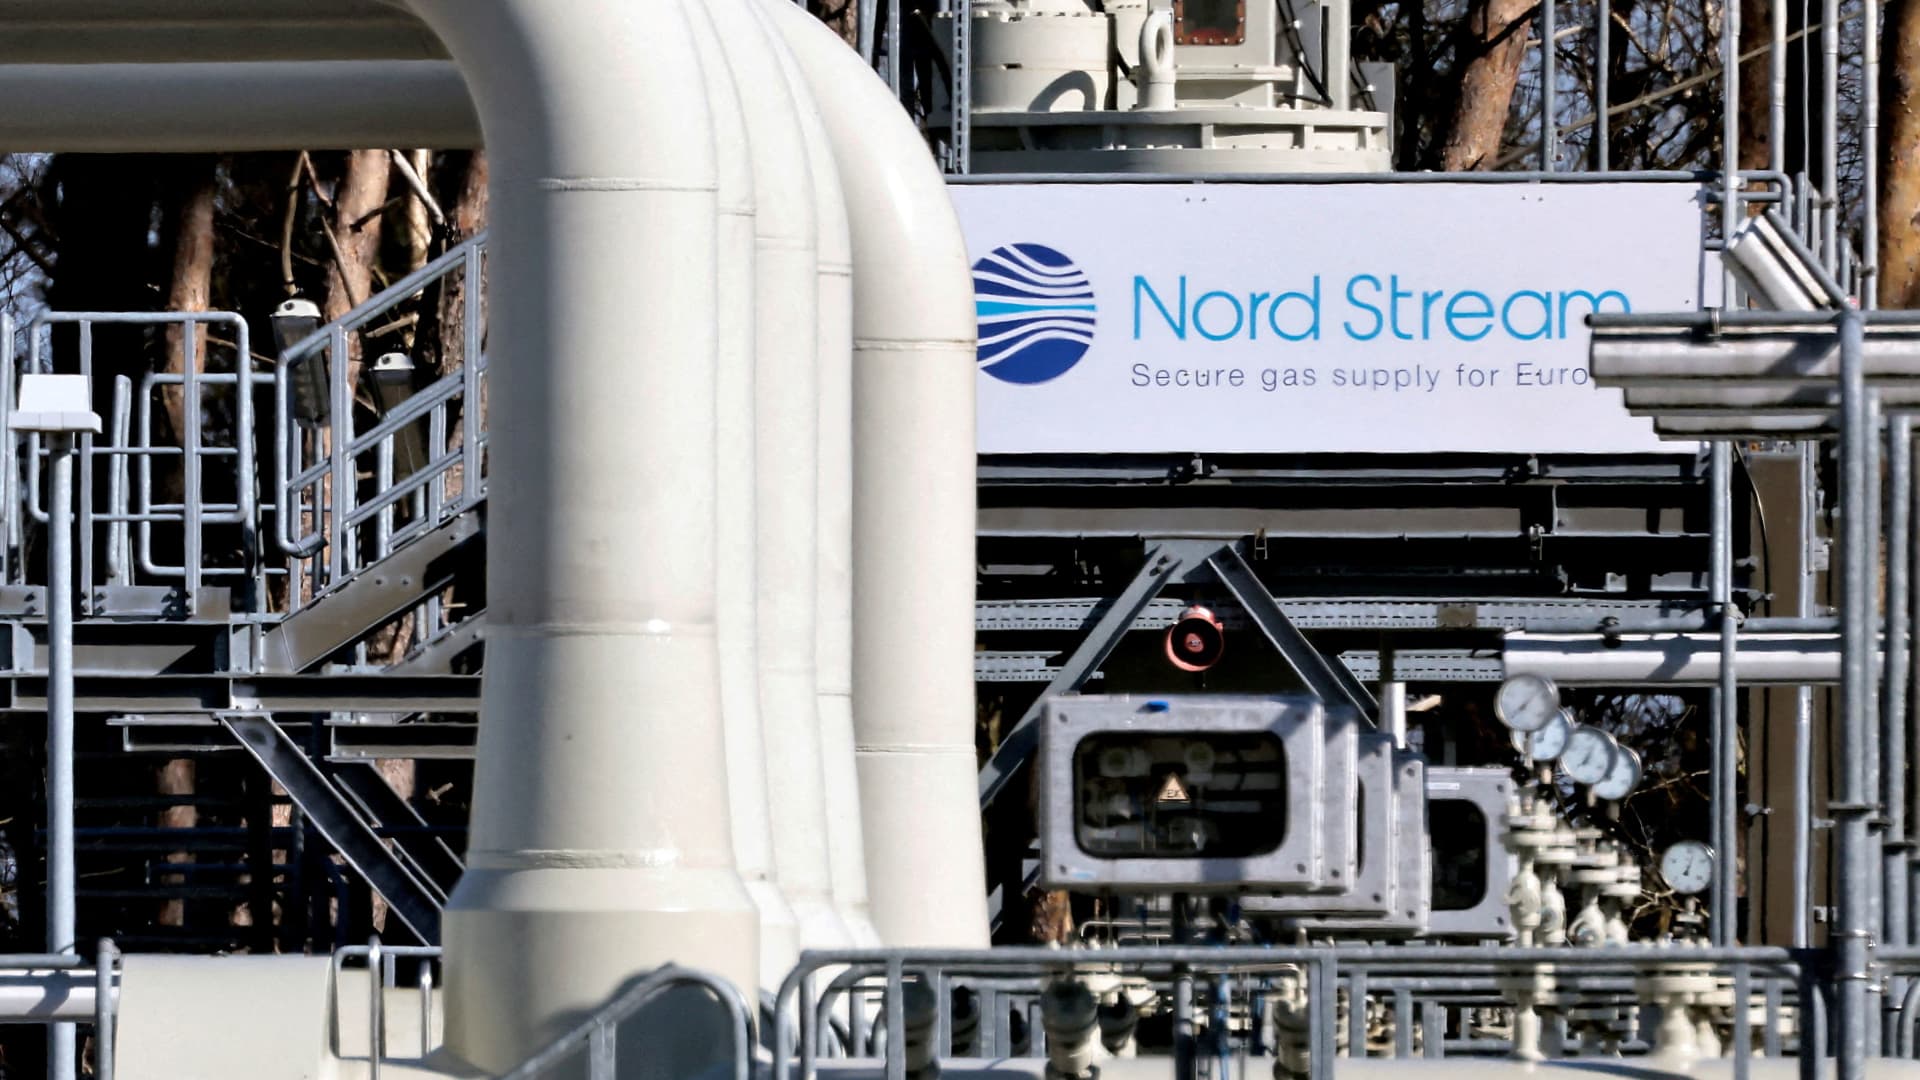 Nord Stream 1 operator says gas flows from Russia to Europe are being resumed after fears of complete cutoff